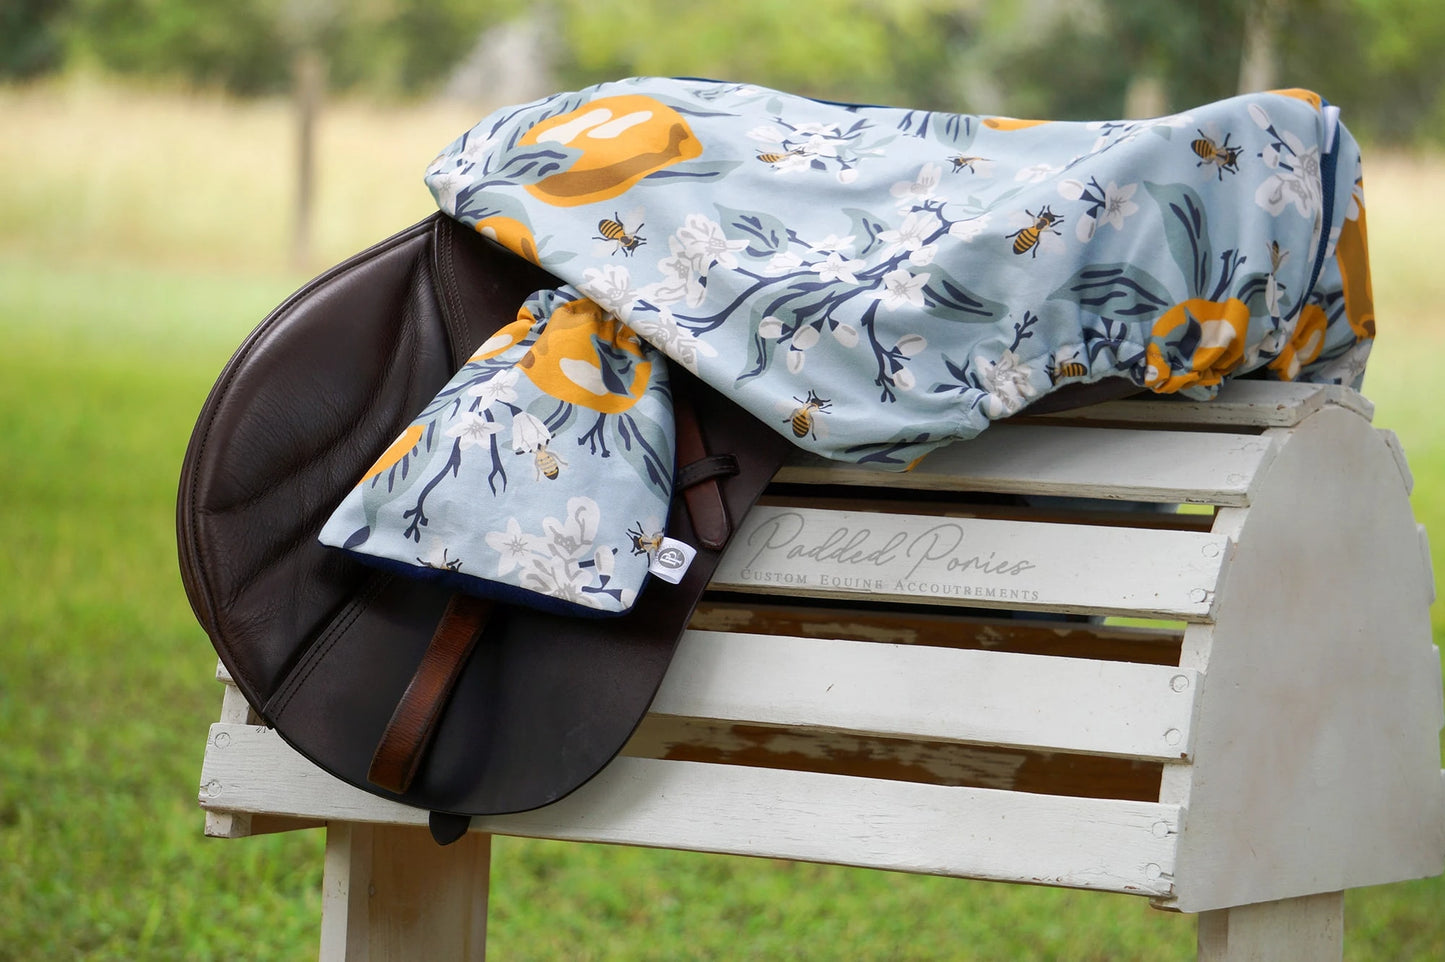 Blue Lemons and Bees Floral All Purpose Saddle Cover Set with Matching Stirrup Covers